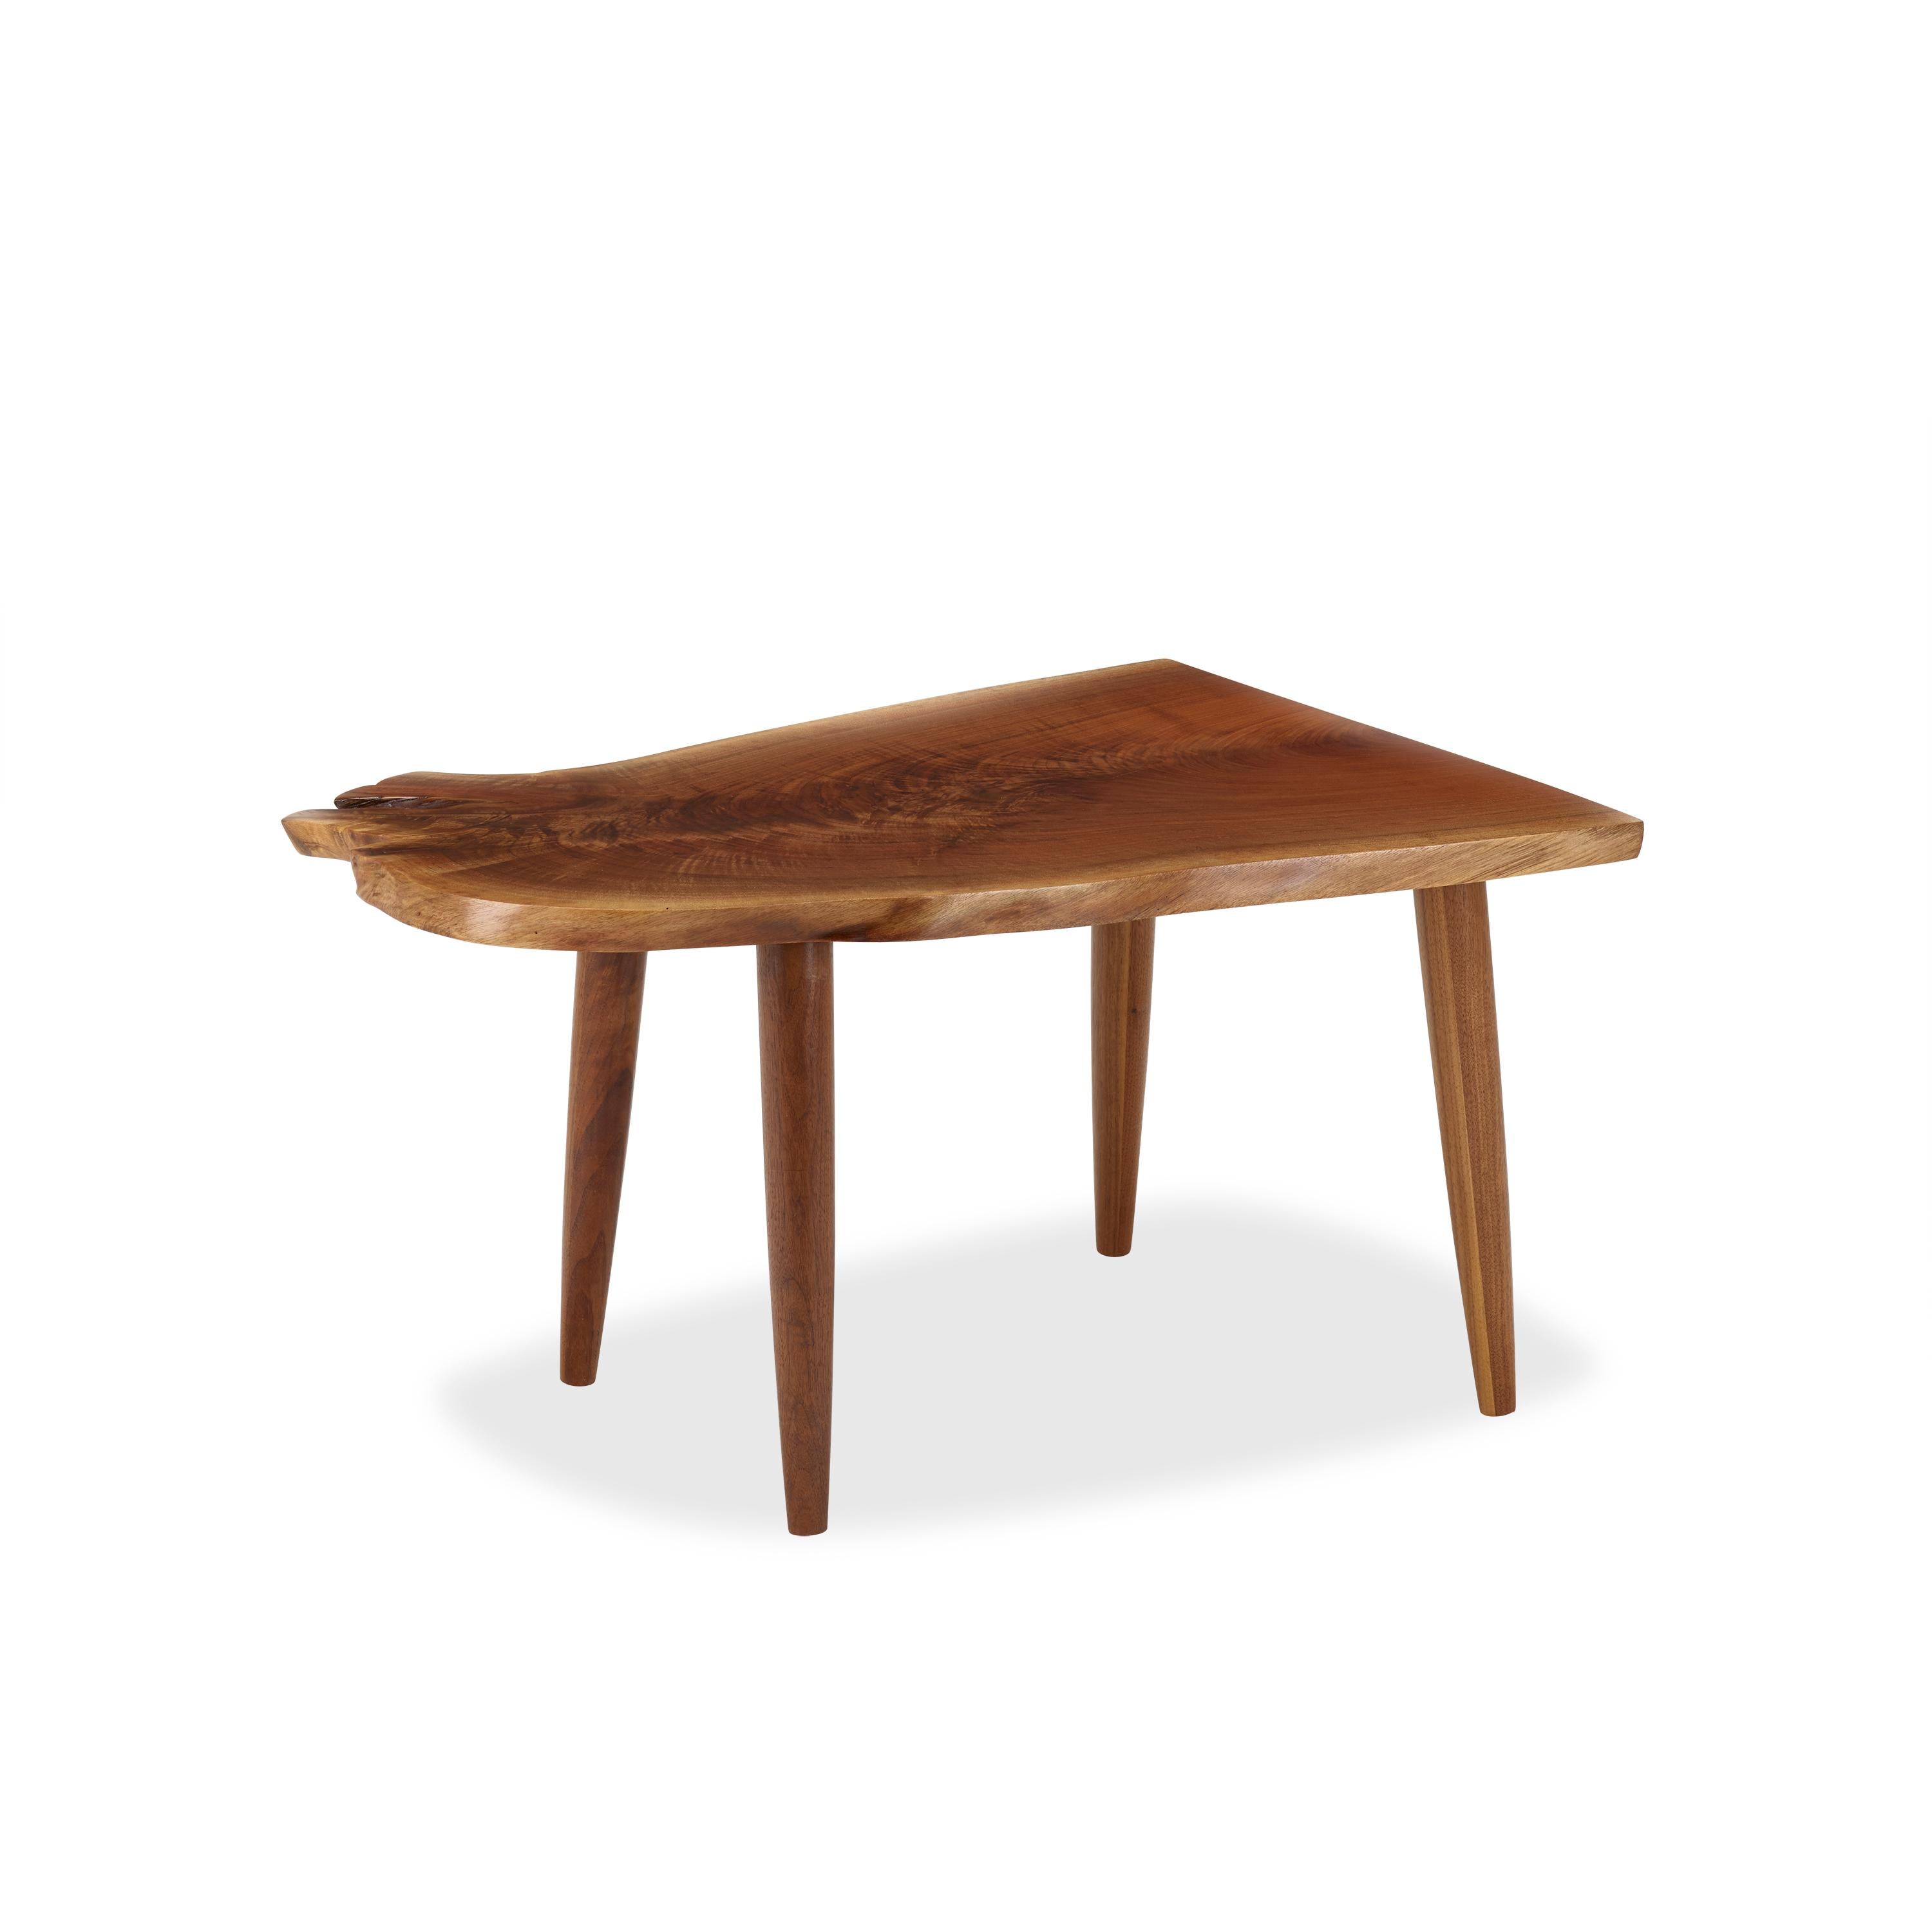 Beautifully figured claro walnut slab with turned walnut legs.
Michael Oates (b. 1991) is an artist and designer based out of Alpha, Nj. Who's current discipline has been functional and spatial design using wood as his primary medium.
Living and